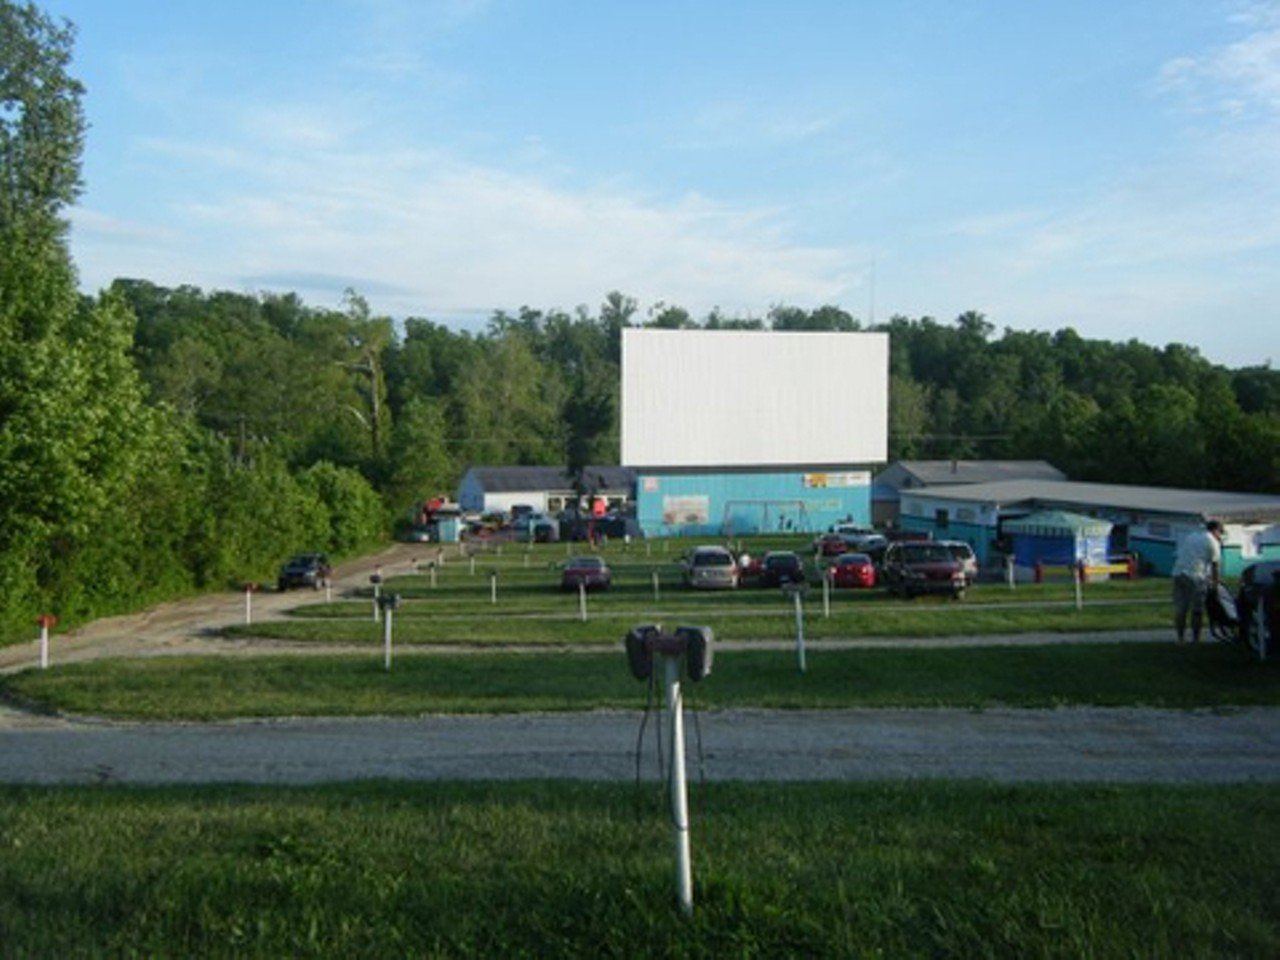 Georgetown Drive-In
8200 State Road 64Originally opened in 1951, this double-screen theater in Georgetown, IN hosts double features on both screens at the same time. This theater also has traditional speakers to attach to your car if you want the classic drive-in experience from decades ago. Every row in this theater is higher than the row in front, so you will always have a place to see either screen.